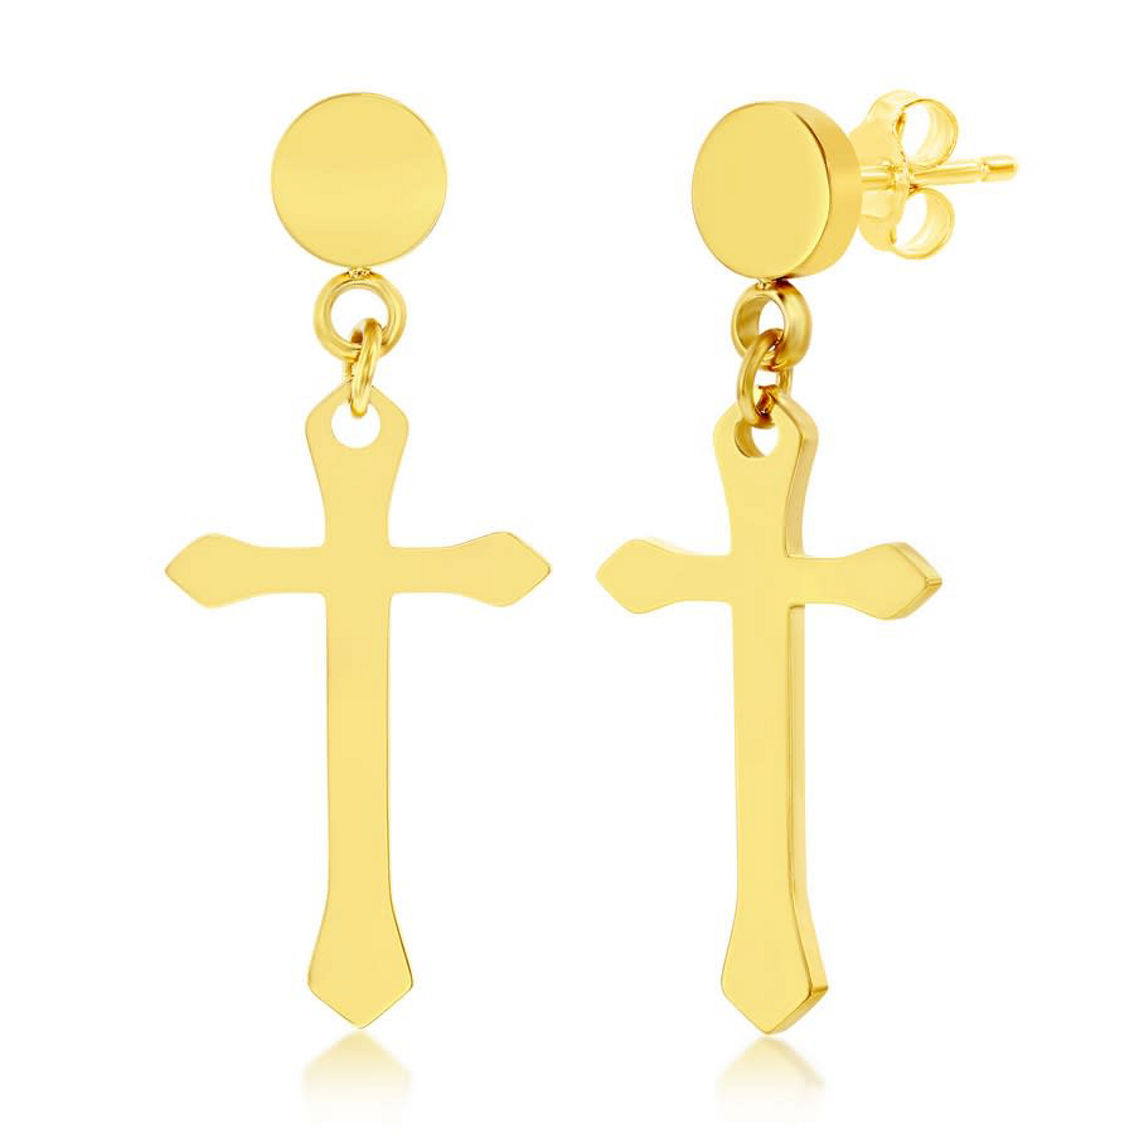 Metallo Stainless Steel Polished Cross Earrings - Gold Plated